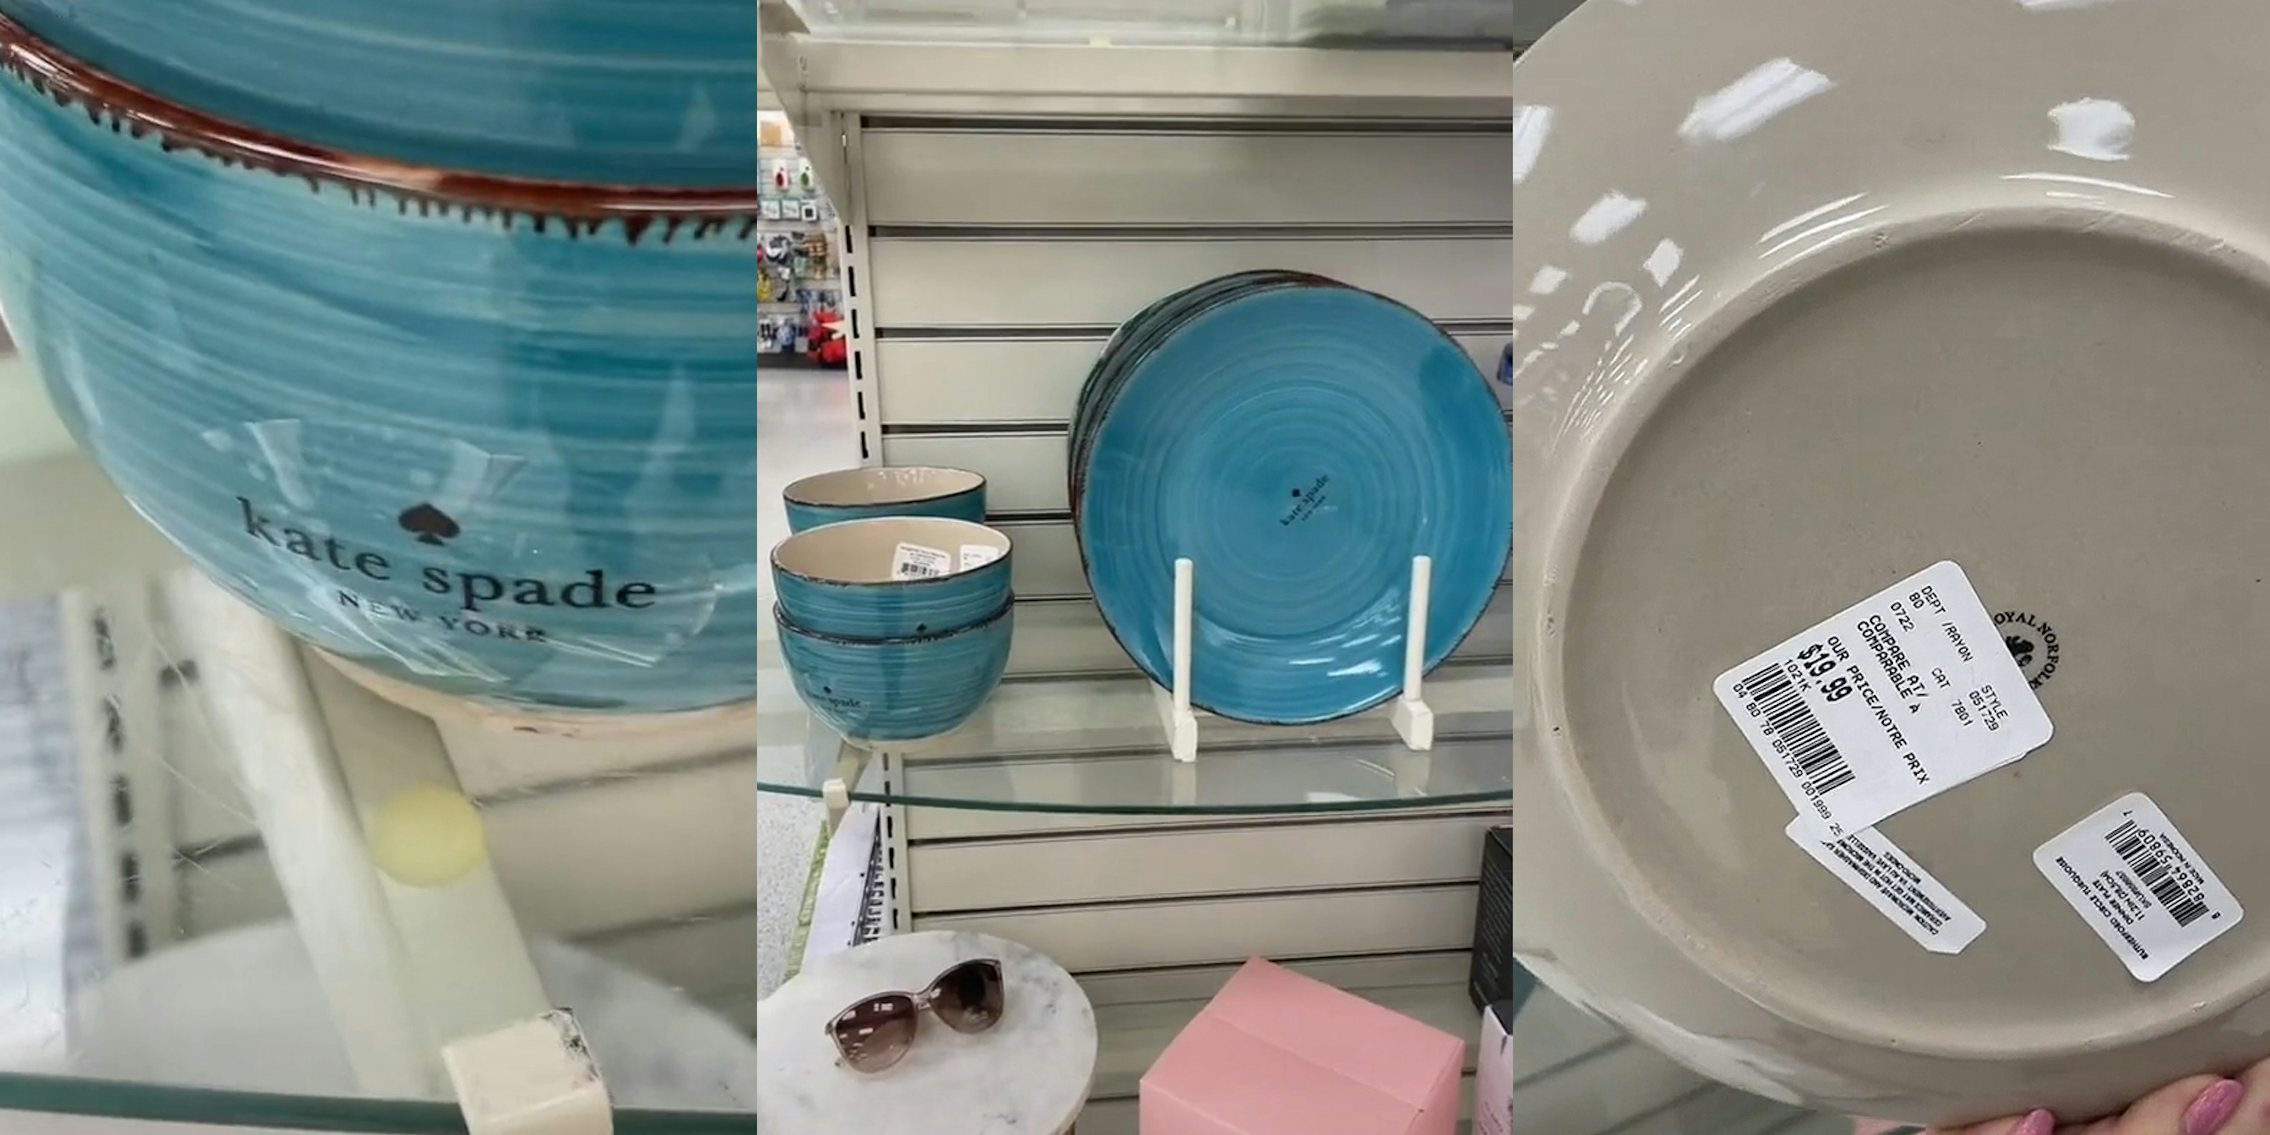 Dollar Tree bowl with Kate Spade sticker on at T.J. Maxx (l) Bowls and plates at T.J. Maxx with Kate Spade stickers on them (c) person holding up back of plate to show '$19.99' price (r)